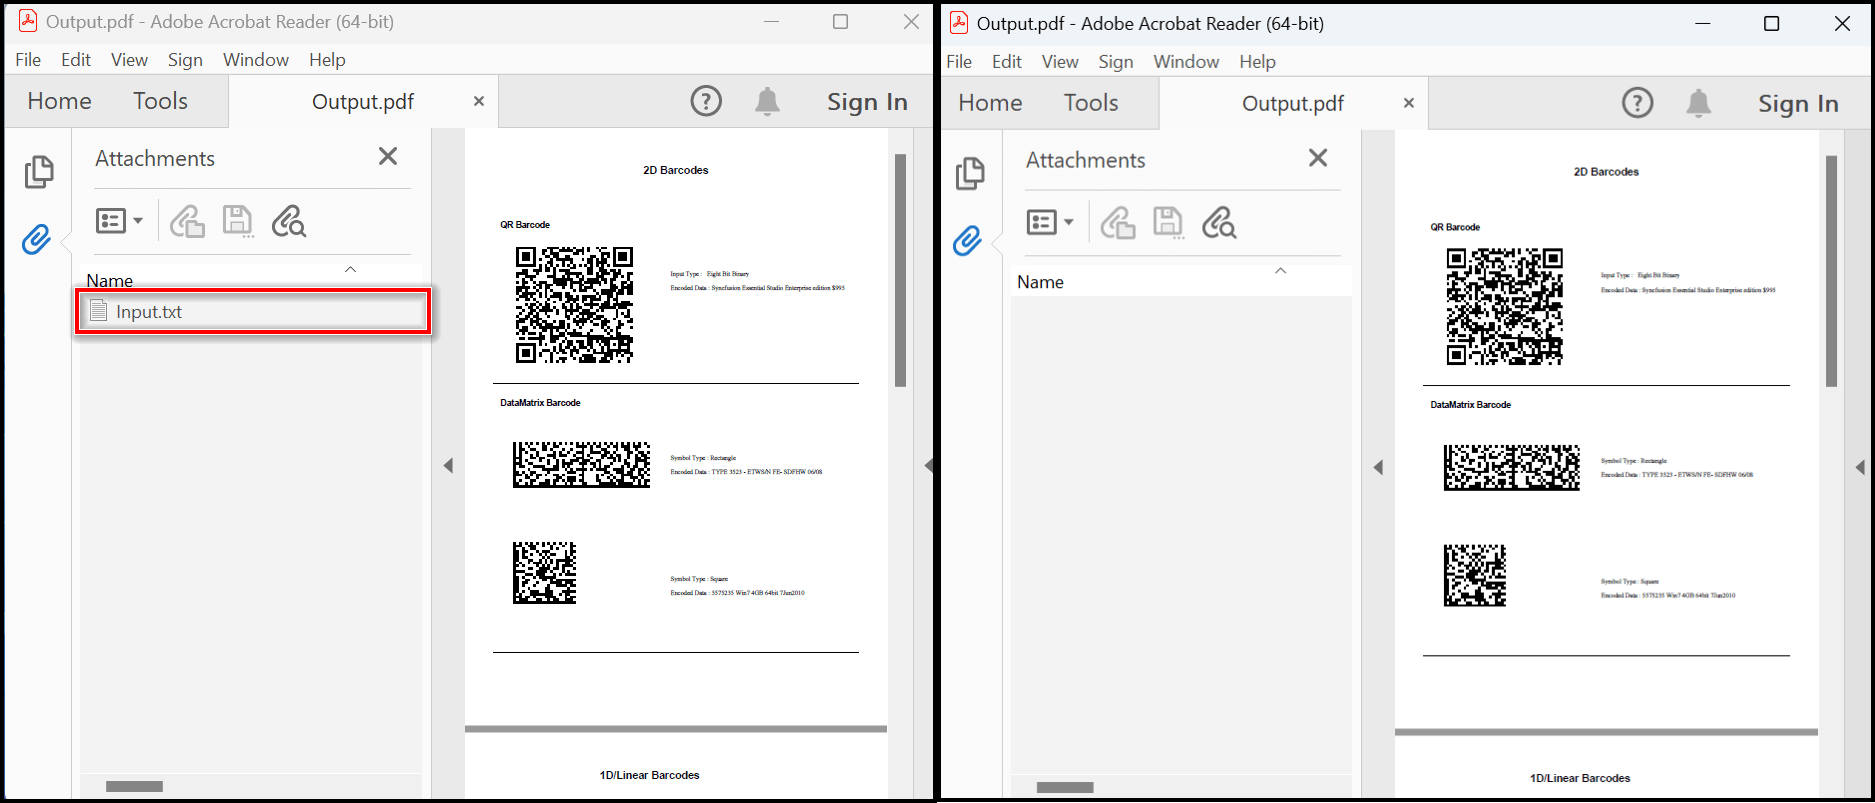 Removing attachments from a PDF document